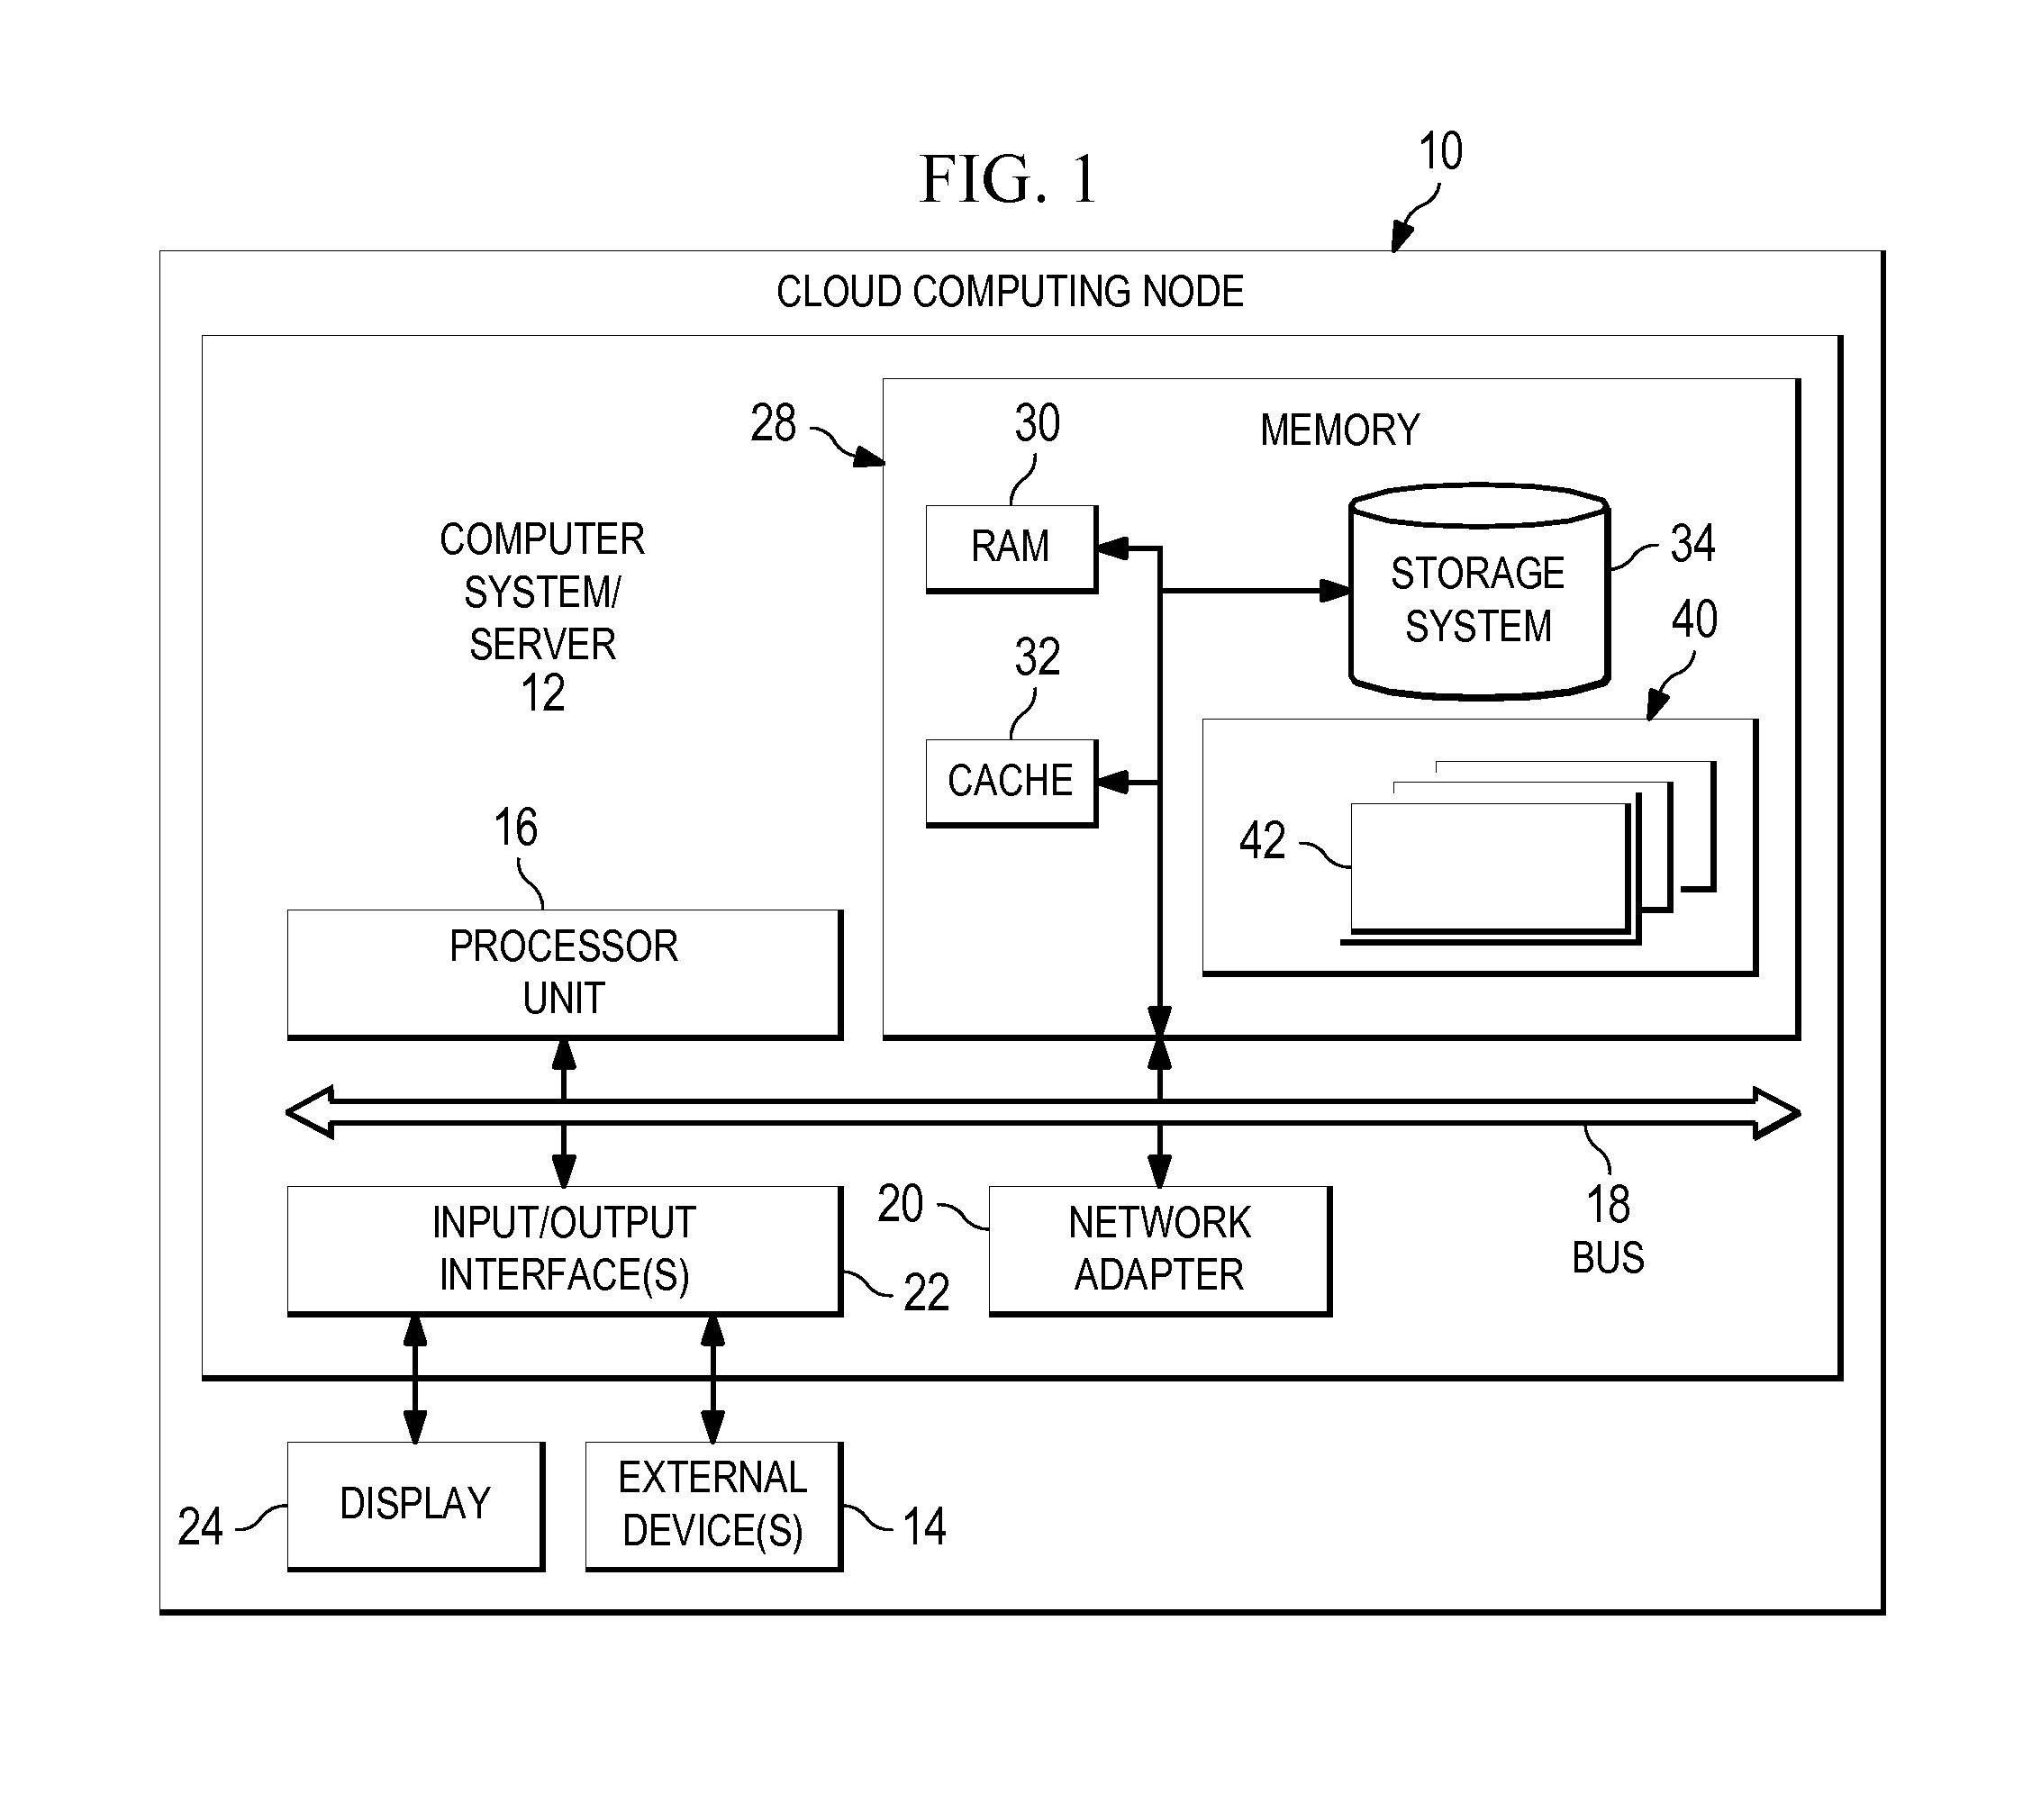 Resource configuration for a network data processing system